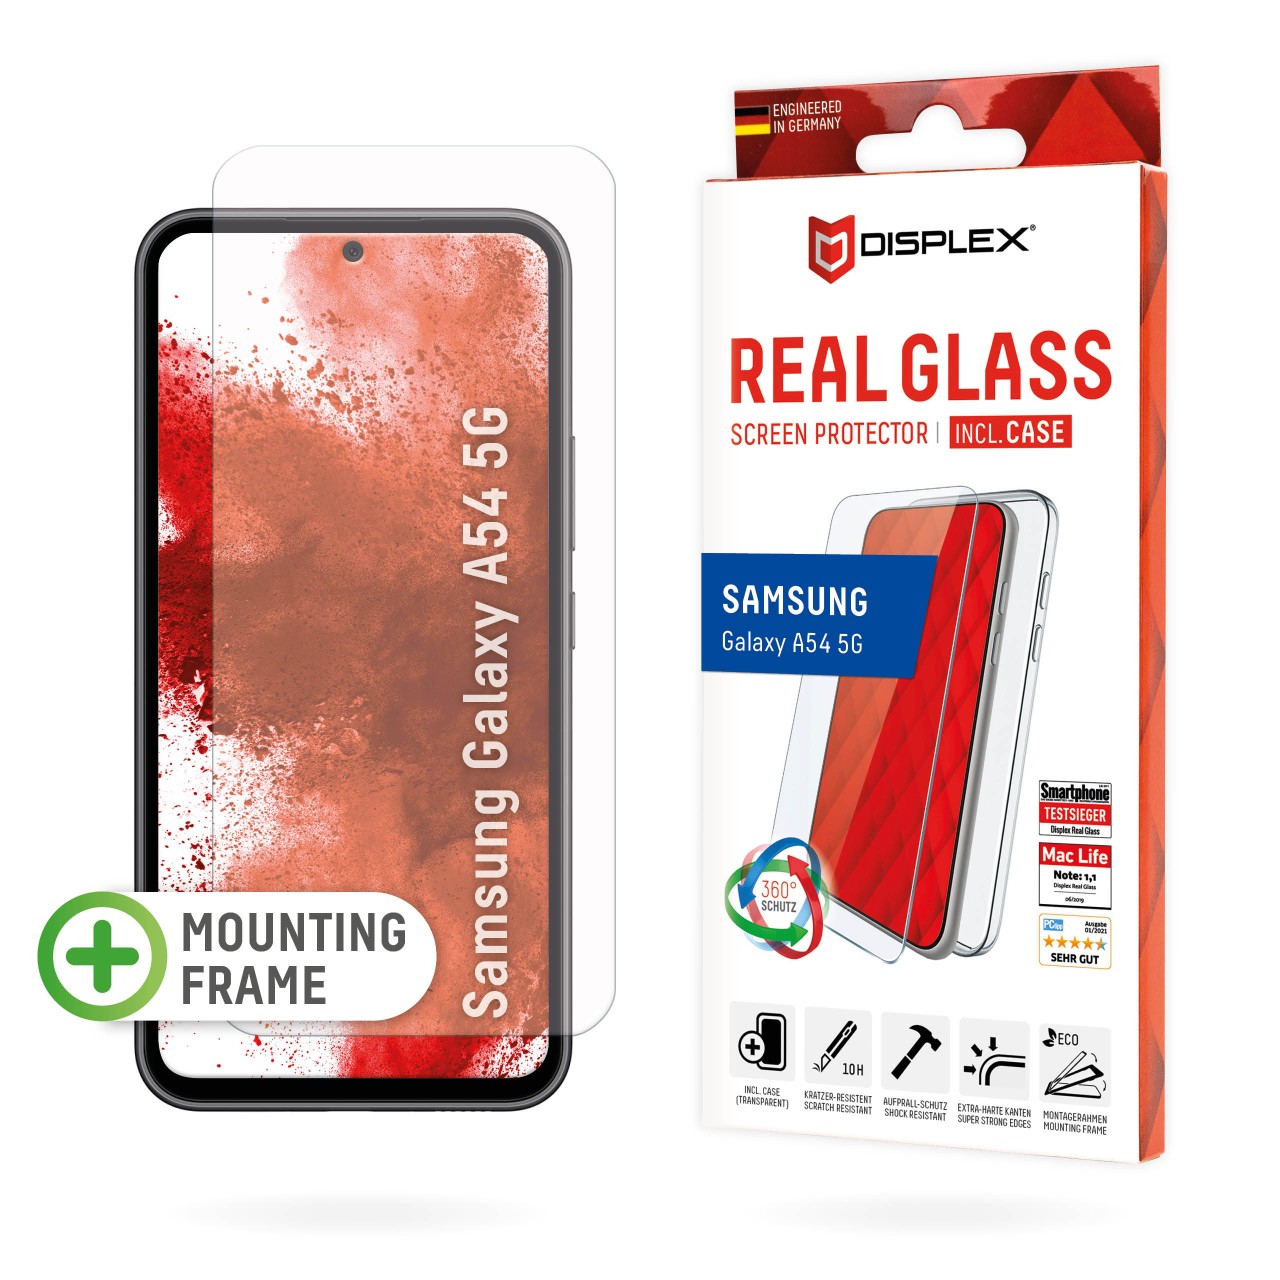 Real Glass for Apple iPhone X/XS/11 Pro (5,8"), 2D